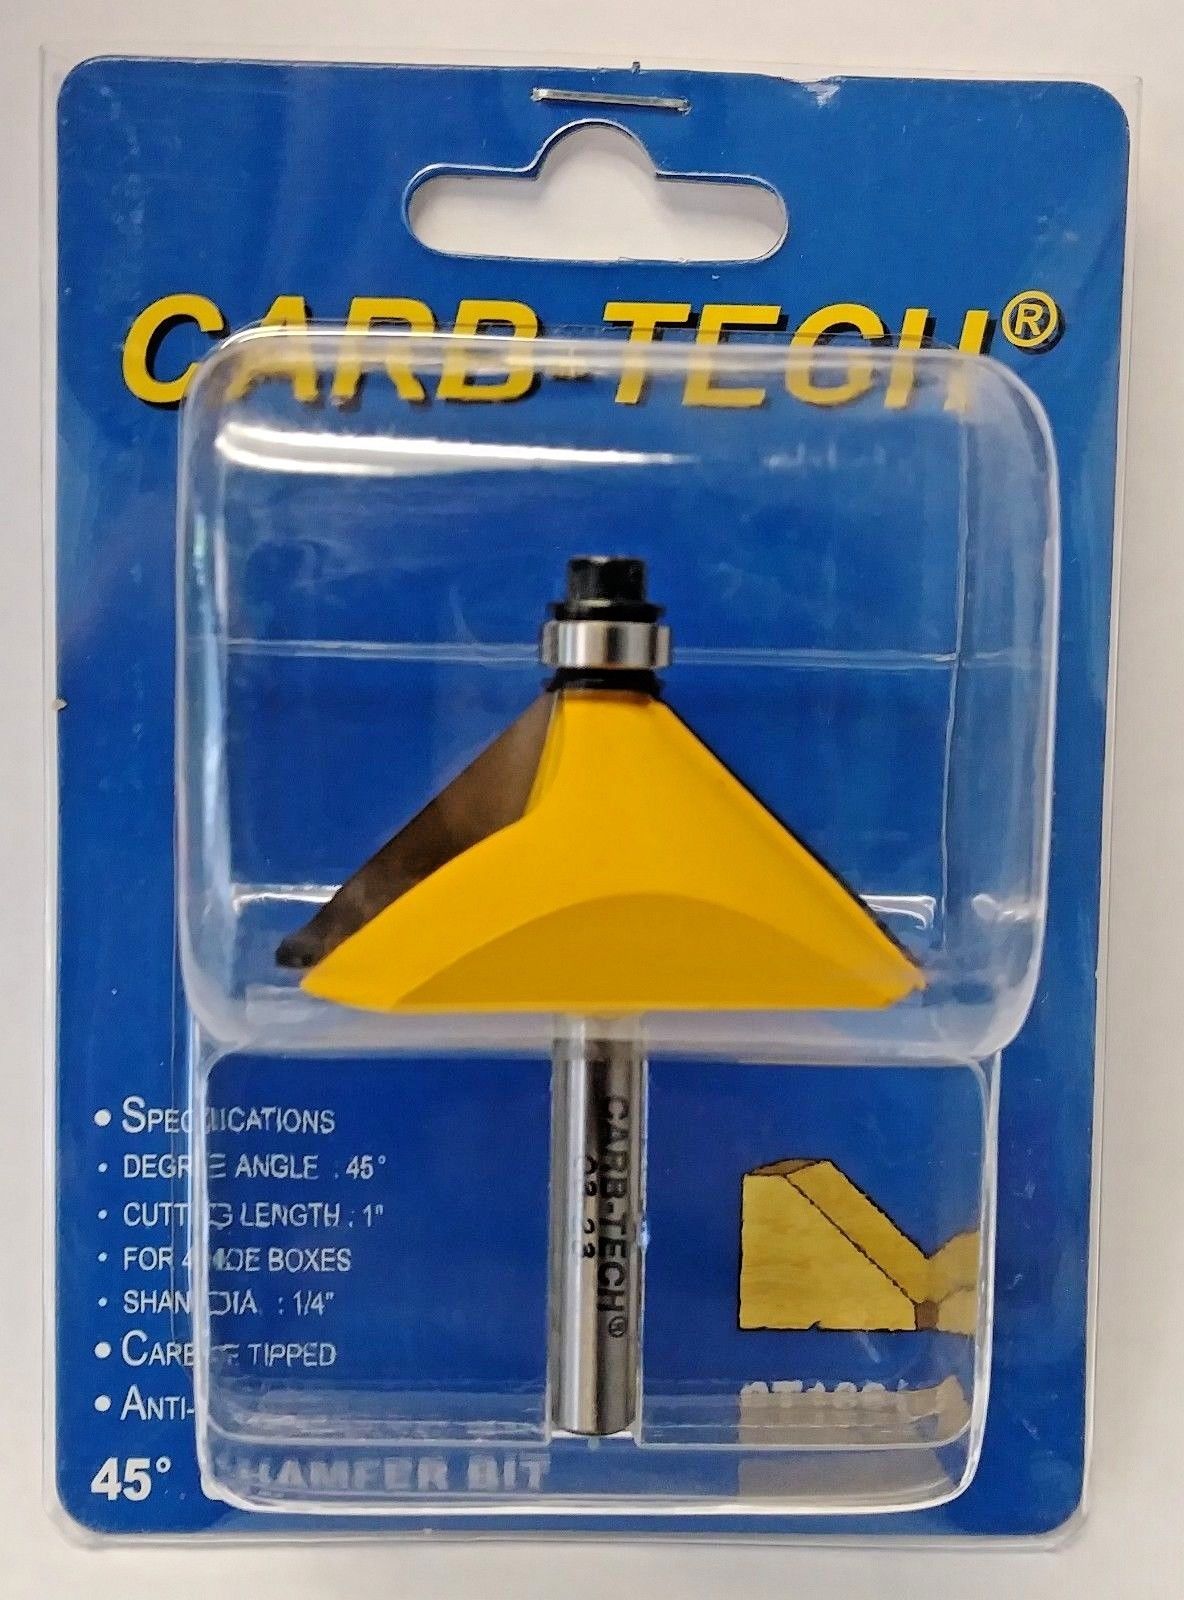 Carb-Tech CT1091K 45° Chamfer Router Bit Carbide Tipped